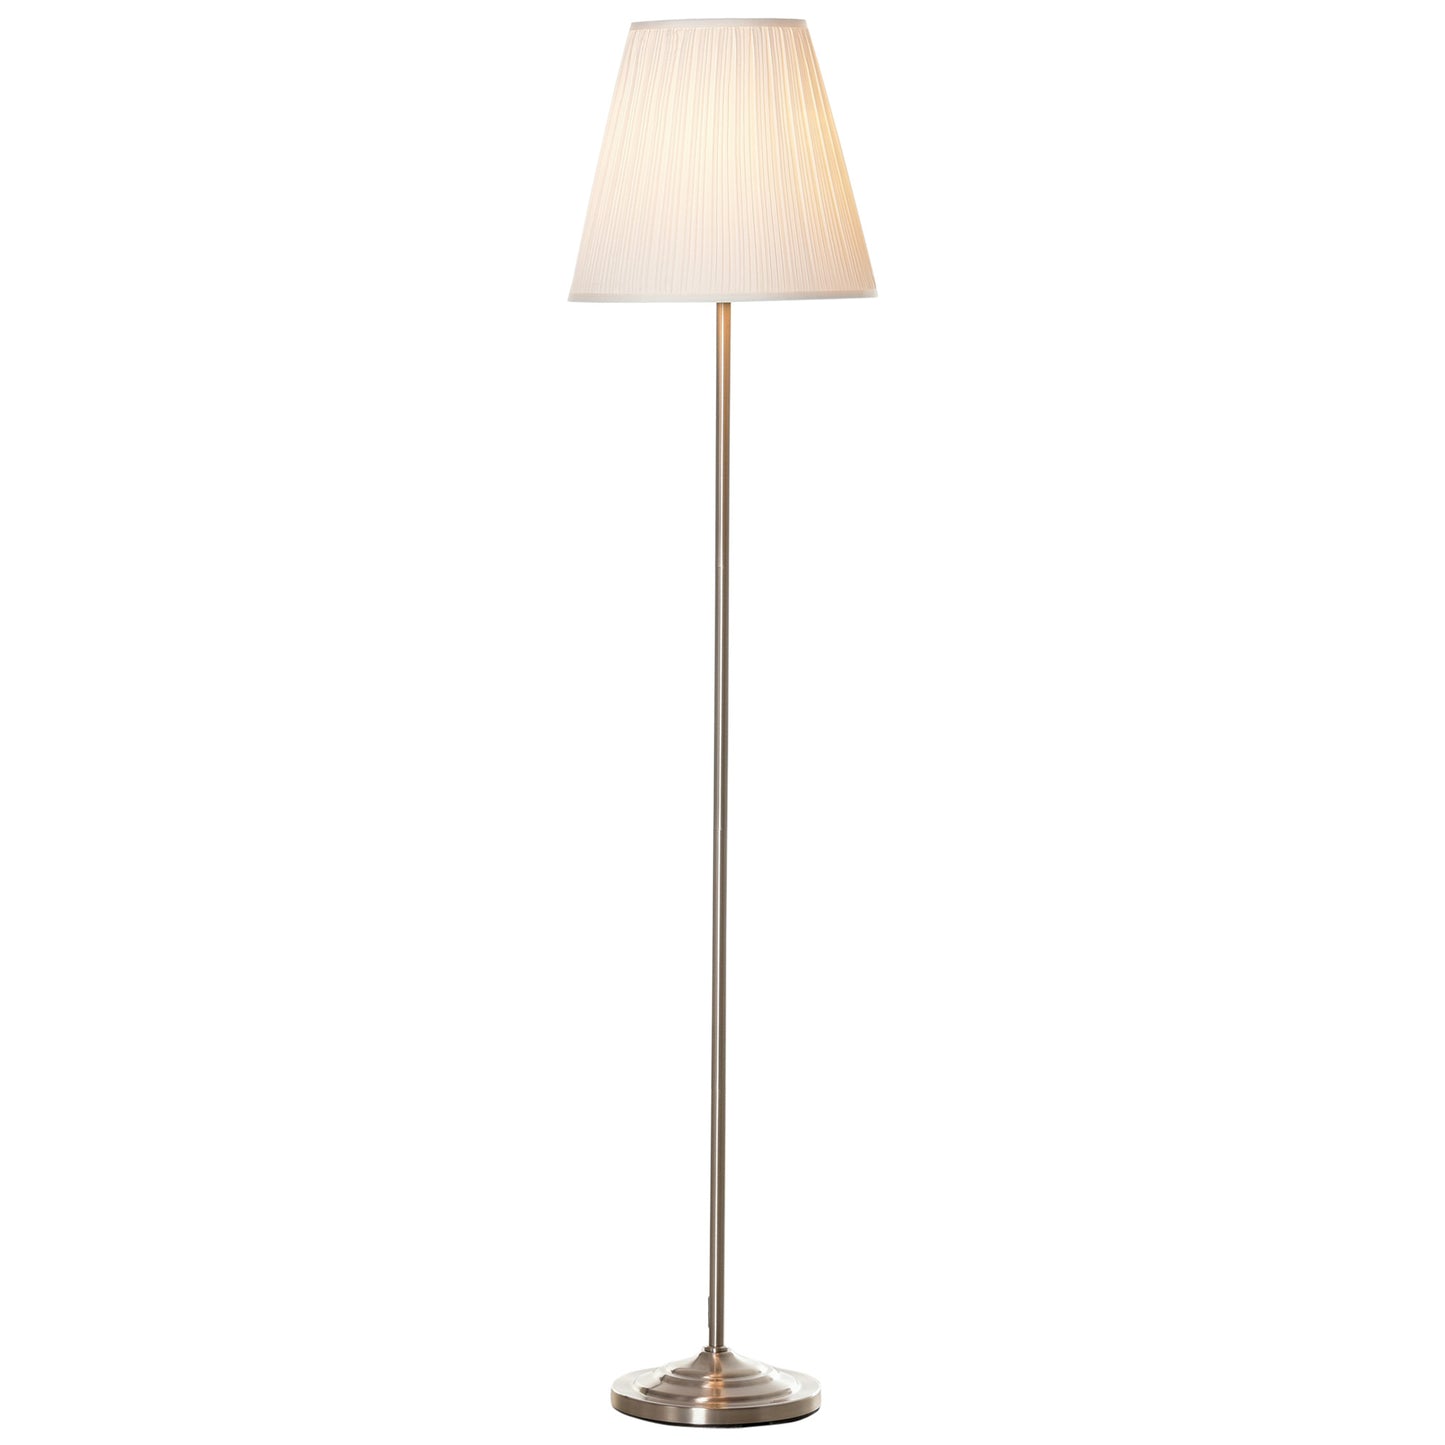 HOMCOM Modern Home Style Floor Lamp with Metal Base Fabric Lampshade White Silver